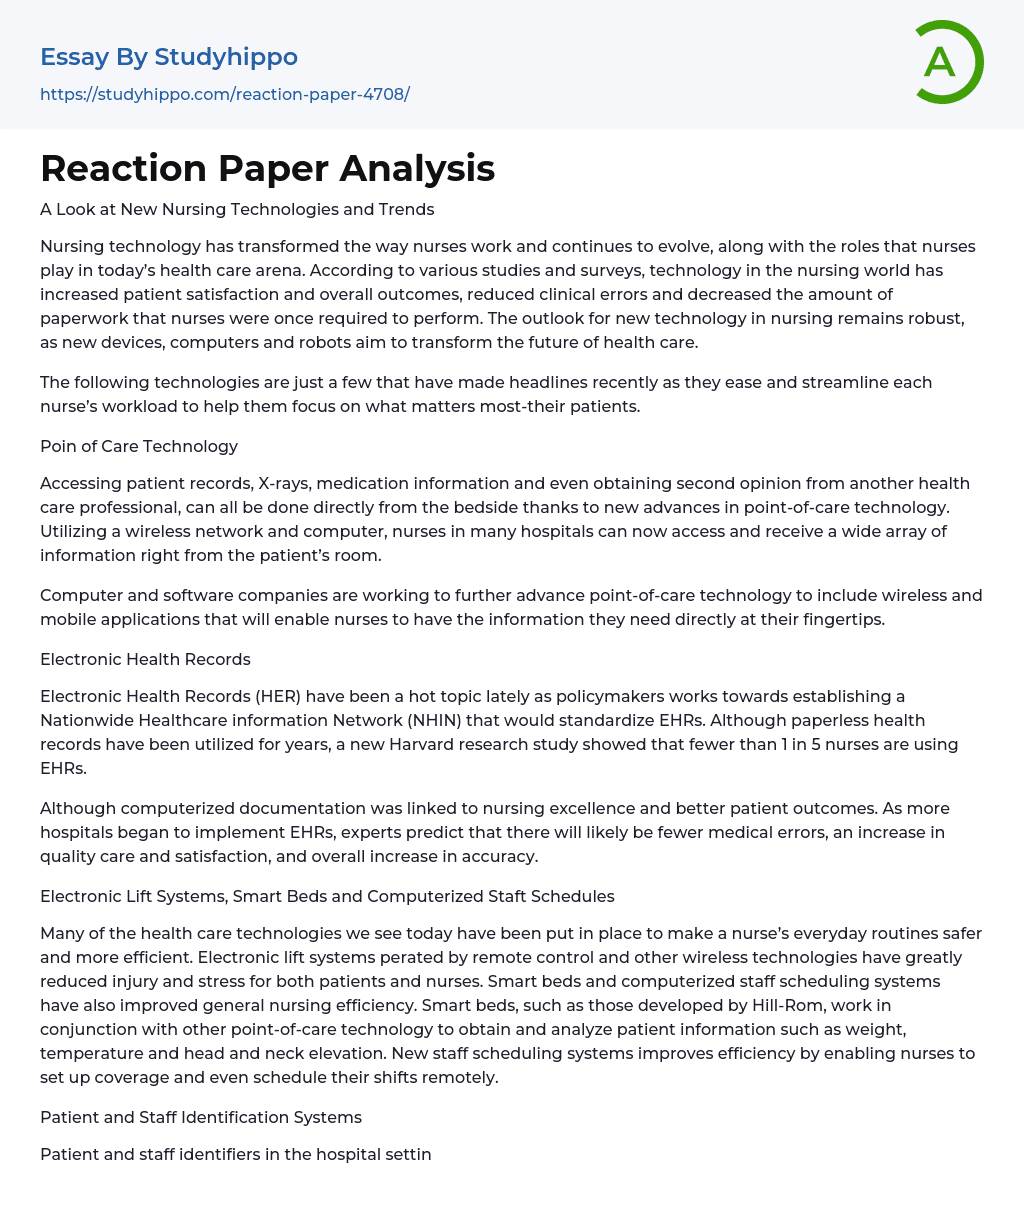 Reaction Paper Analysis Essay Example